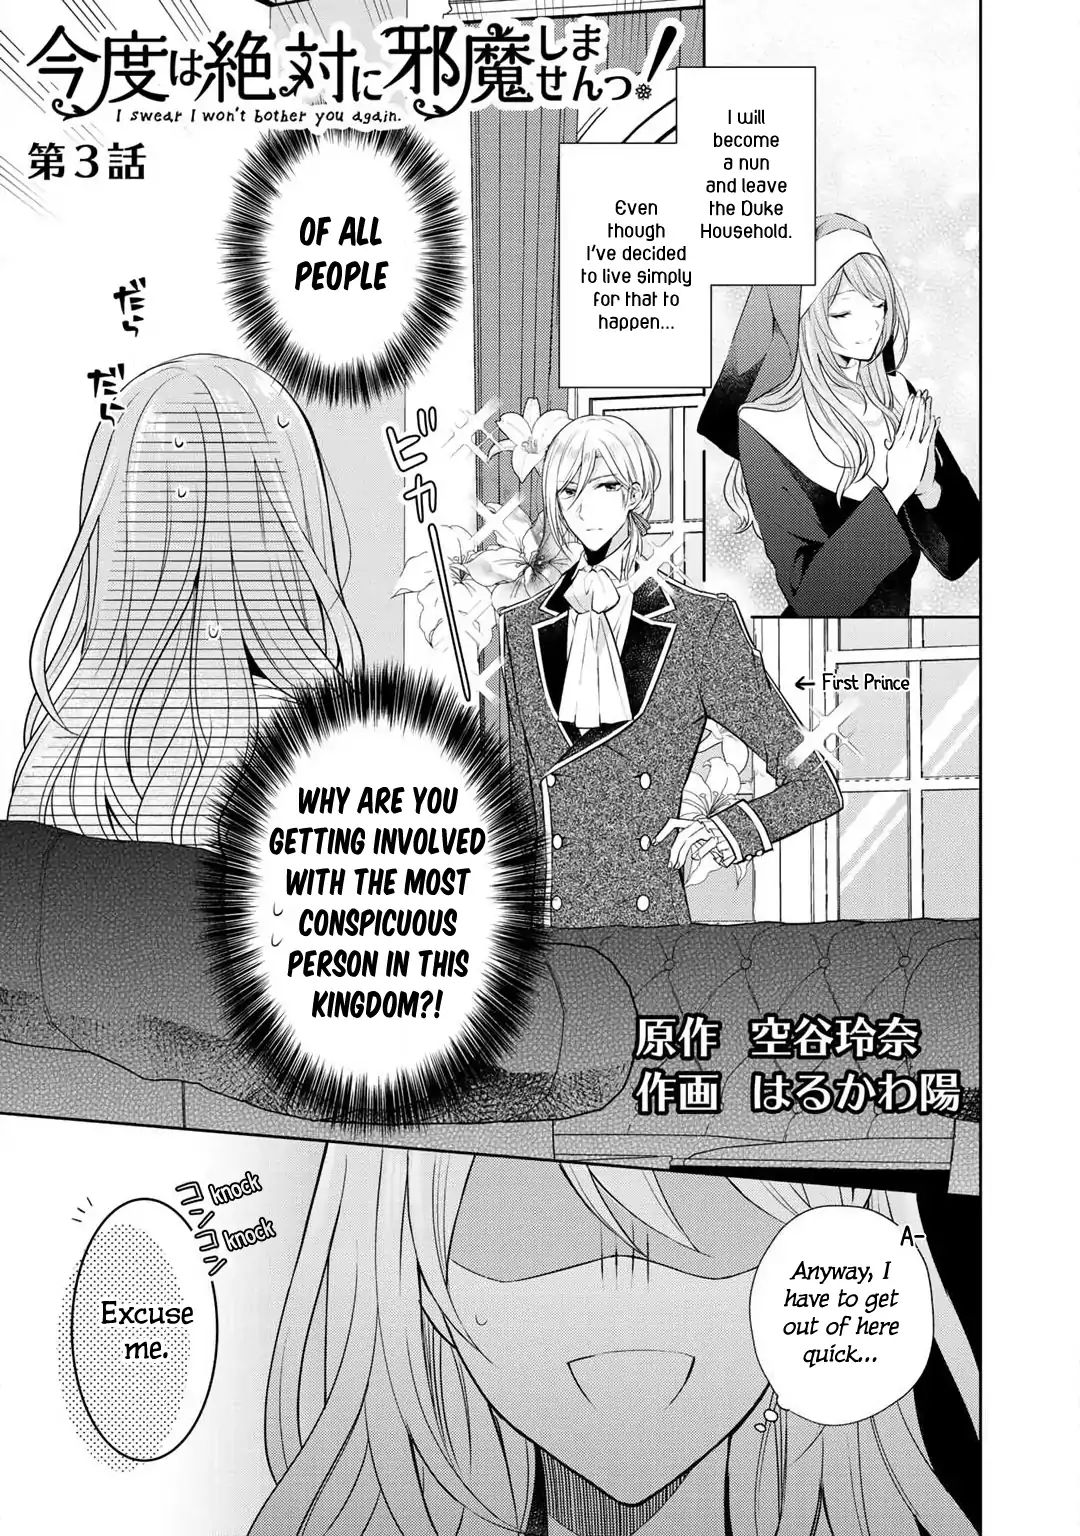 I Swear I Won't Bother You Again! Vol.1 Chapter 3